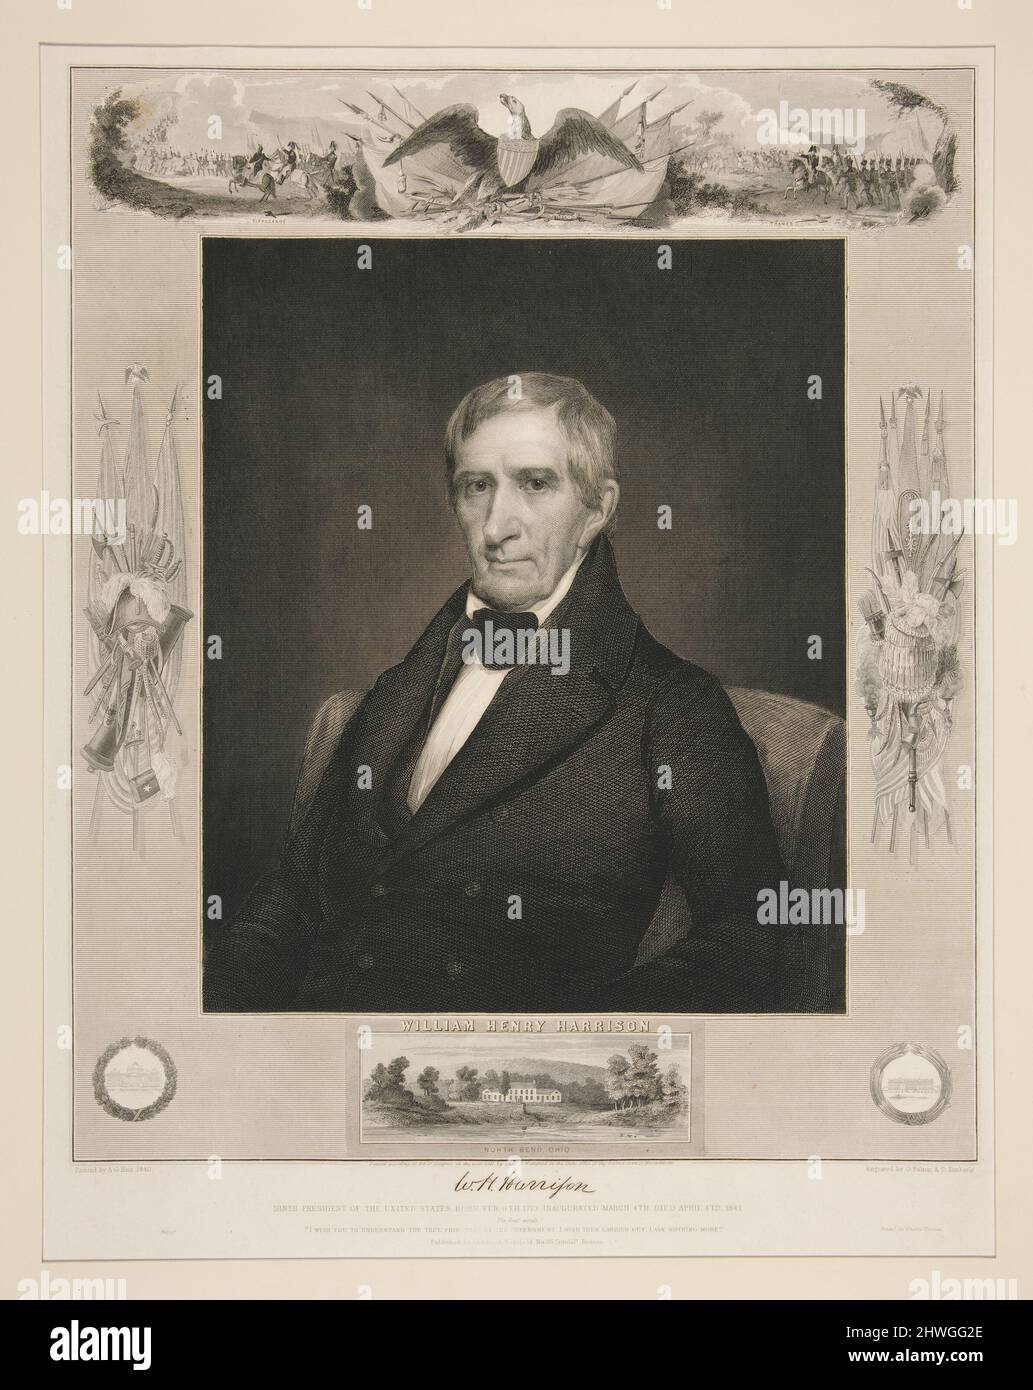 W. H. Harrison (William Henry Harrison). Engraver: Oliver Pelton, American, 1798–1882Engraver: Denison Kimberly, American, 1814–1863After: Albert Gallatin Hoit, American, 1809–1856Publisher: Charles A. Wakefield Stock Photo